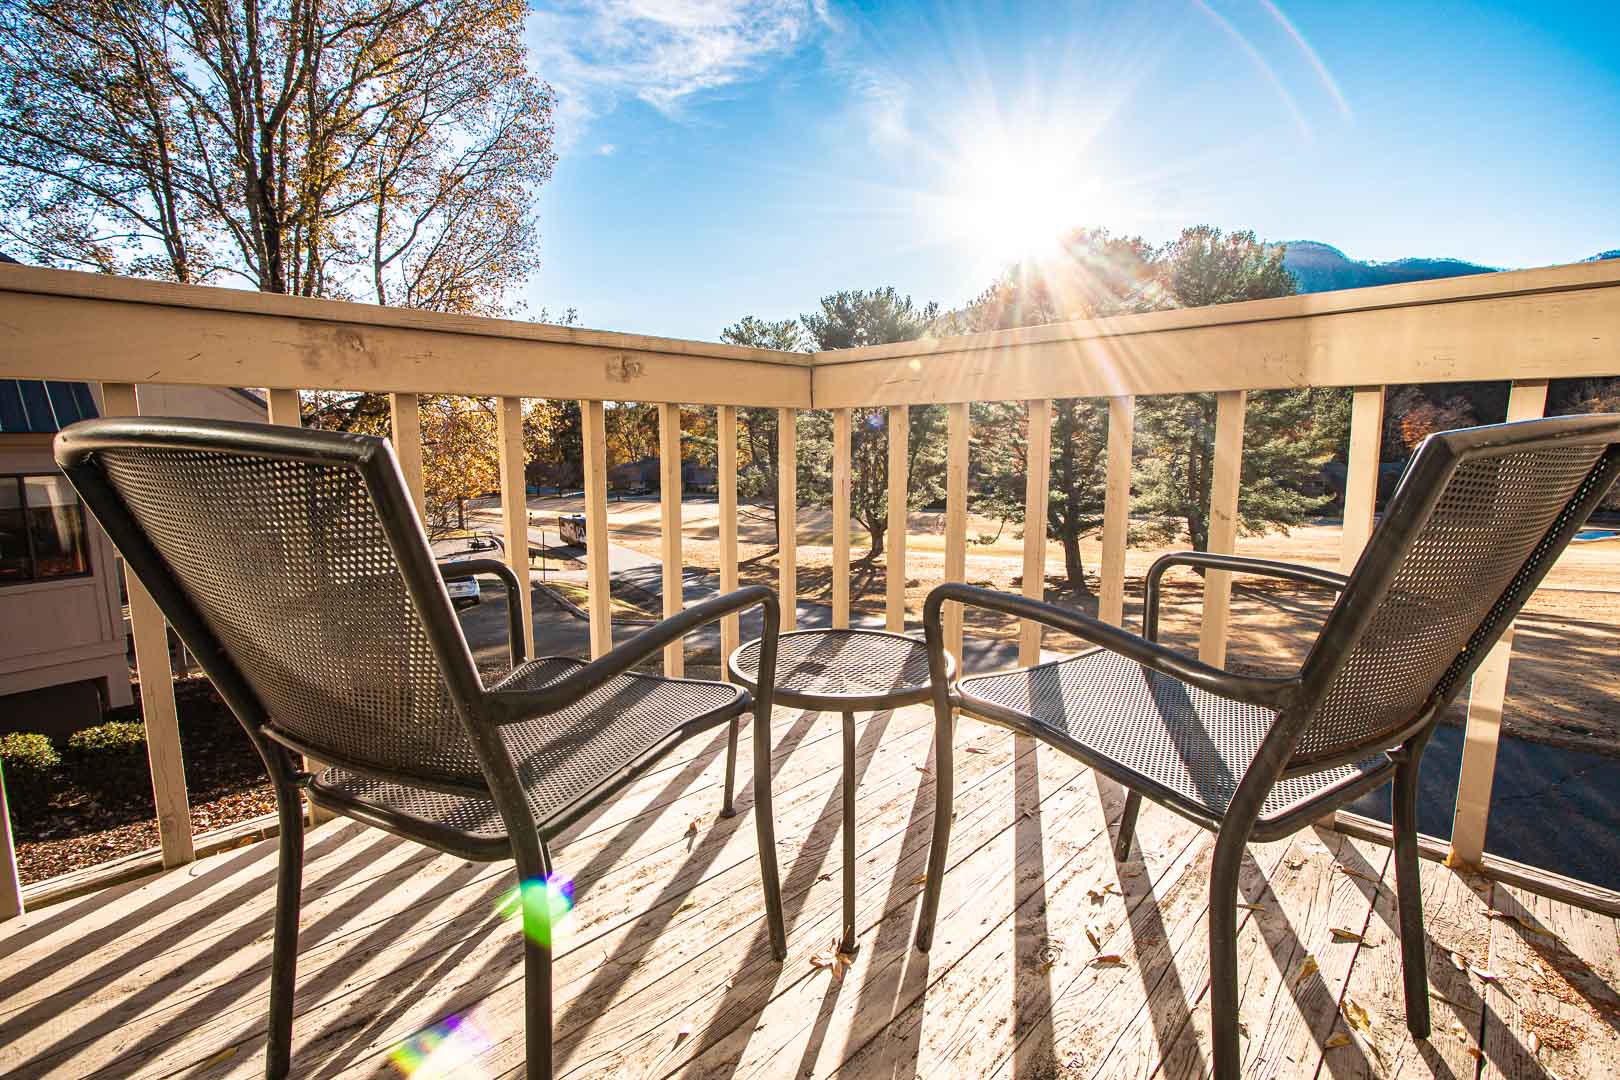 A relaxing view from the balcony at VRI's Mountain Loft Resort in North Carolina.